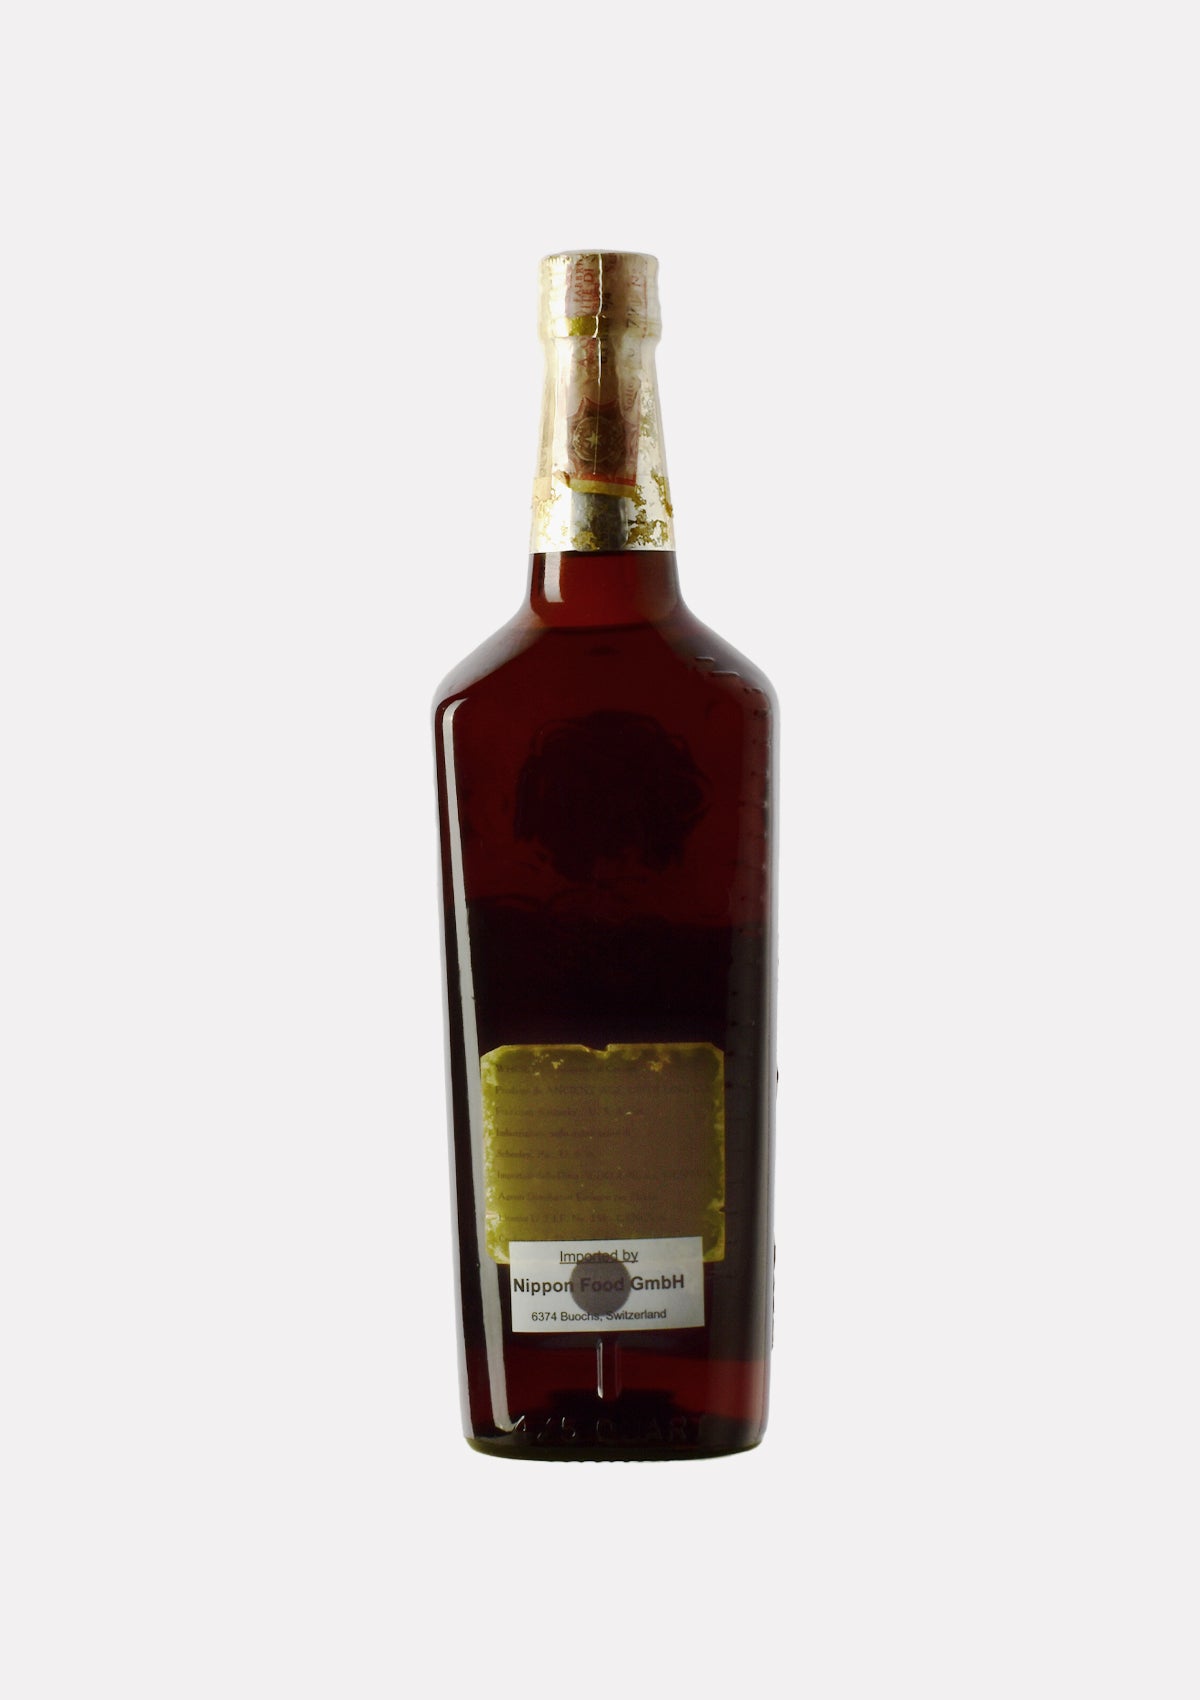 Ancient Age Kentucky Straight Bourbon Whiskey 6 Jahre